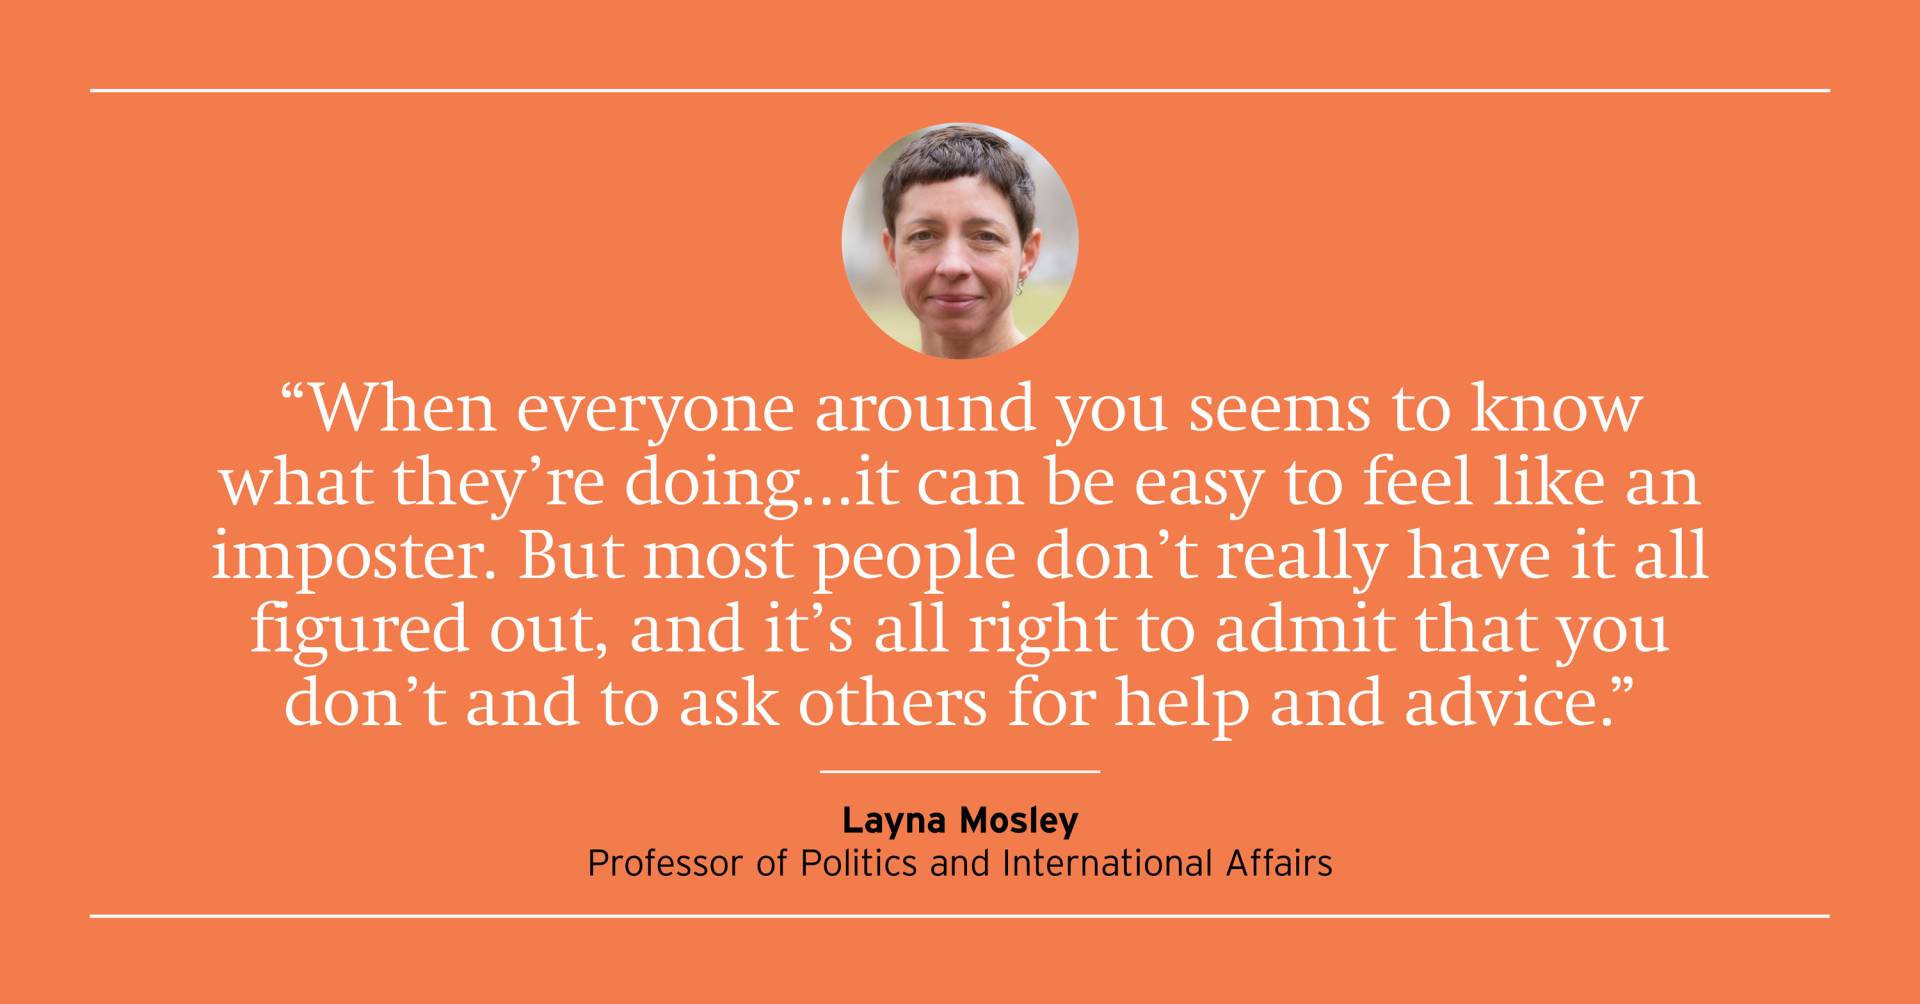 "When everyone around you seems to know what they're doing...it can be easy to feel like an imposter. But most people don't really have it all figured out, and it's all right to admit that you don't and ask others for help and advice." Layna Mosley, Professor of Politics and International Affairs